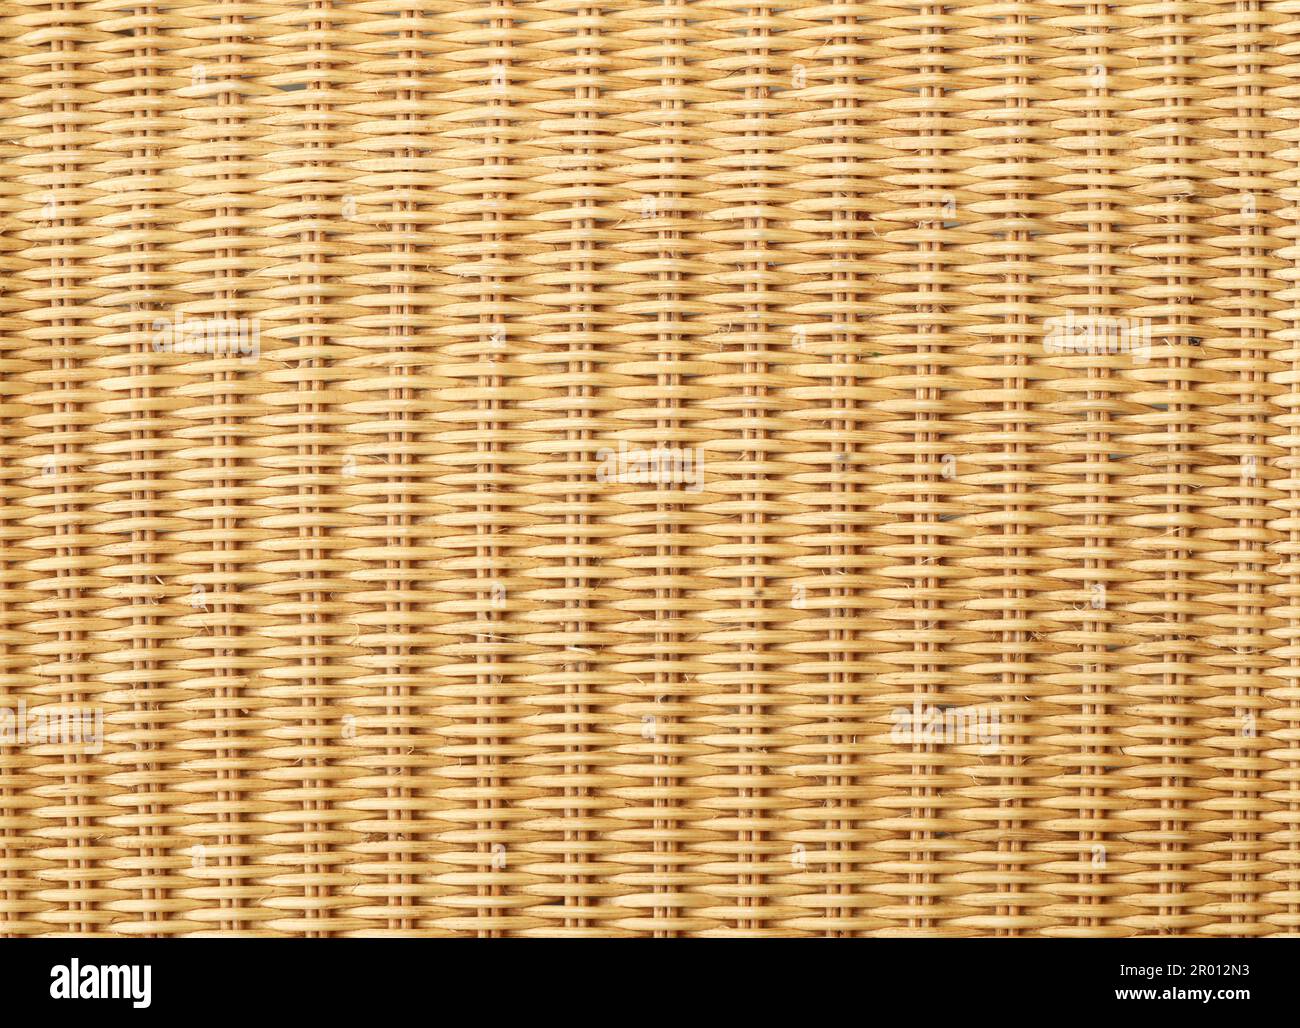 Brown rattan texture for background. Stock Photo